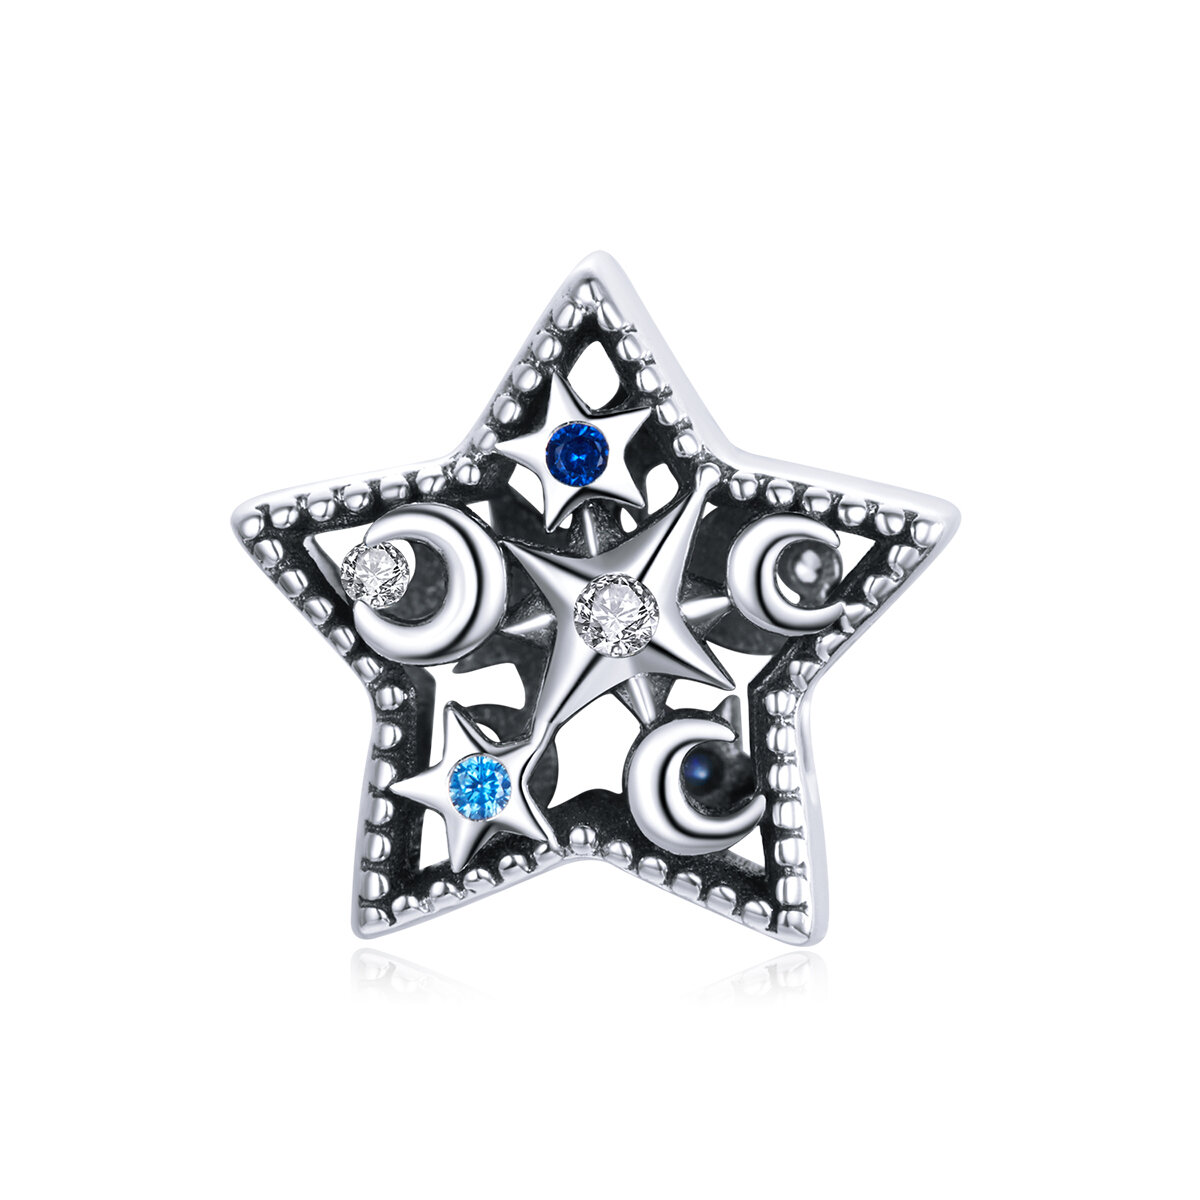 GemKing BSC441 Star Moon Beads S925 Sterling Silver Charm